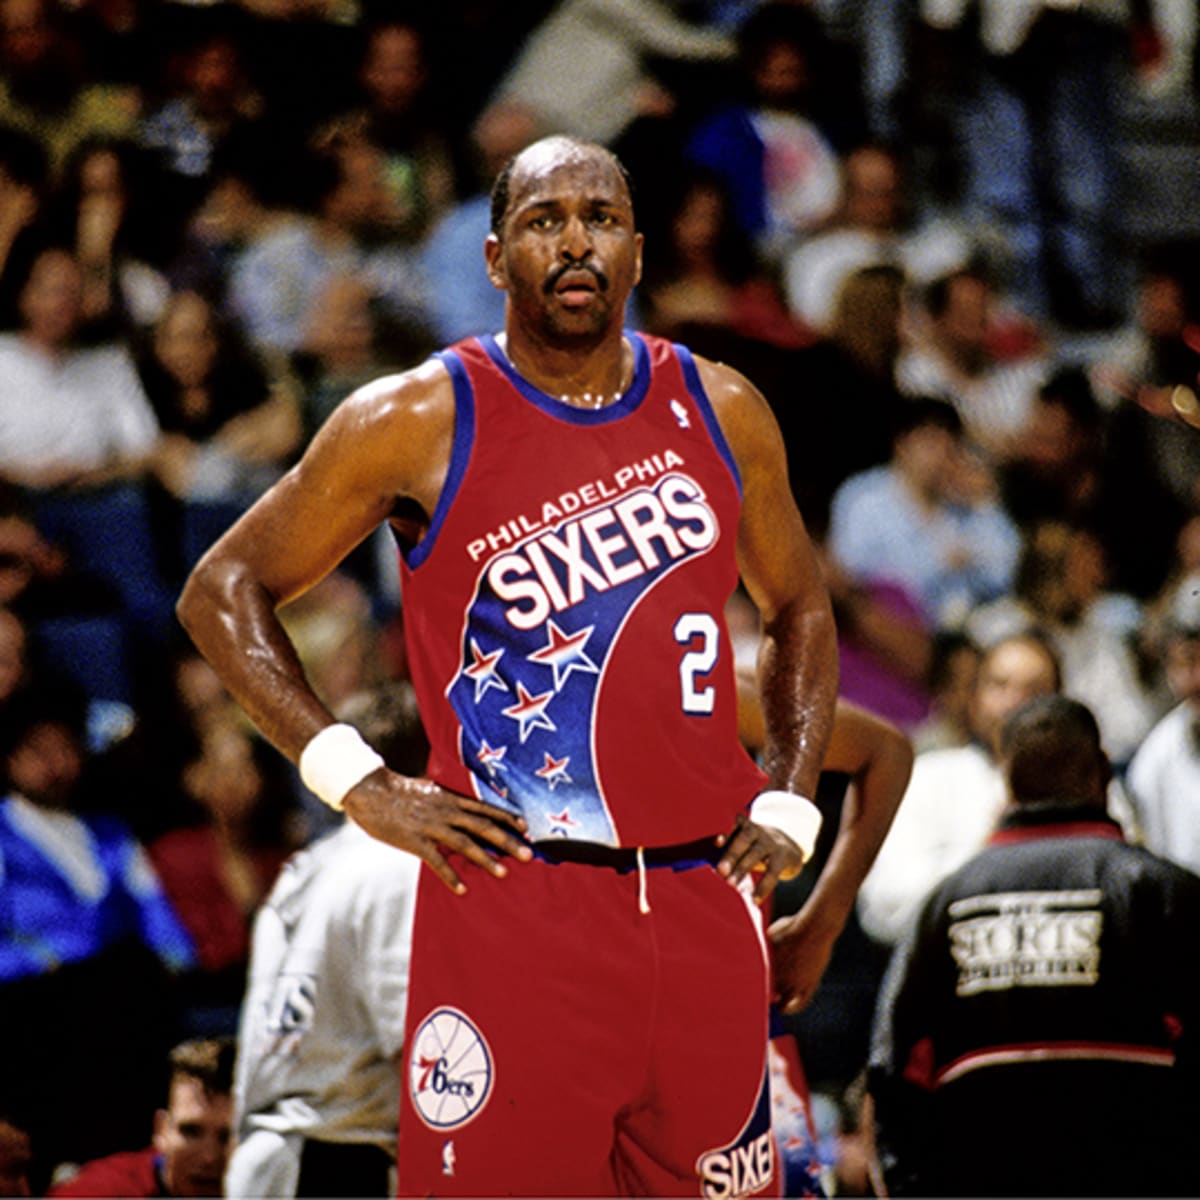 A genuine icon': Hall of Fame center Moses Malone dies at 60 